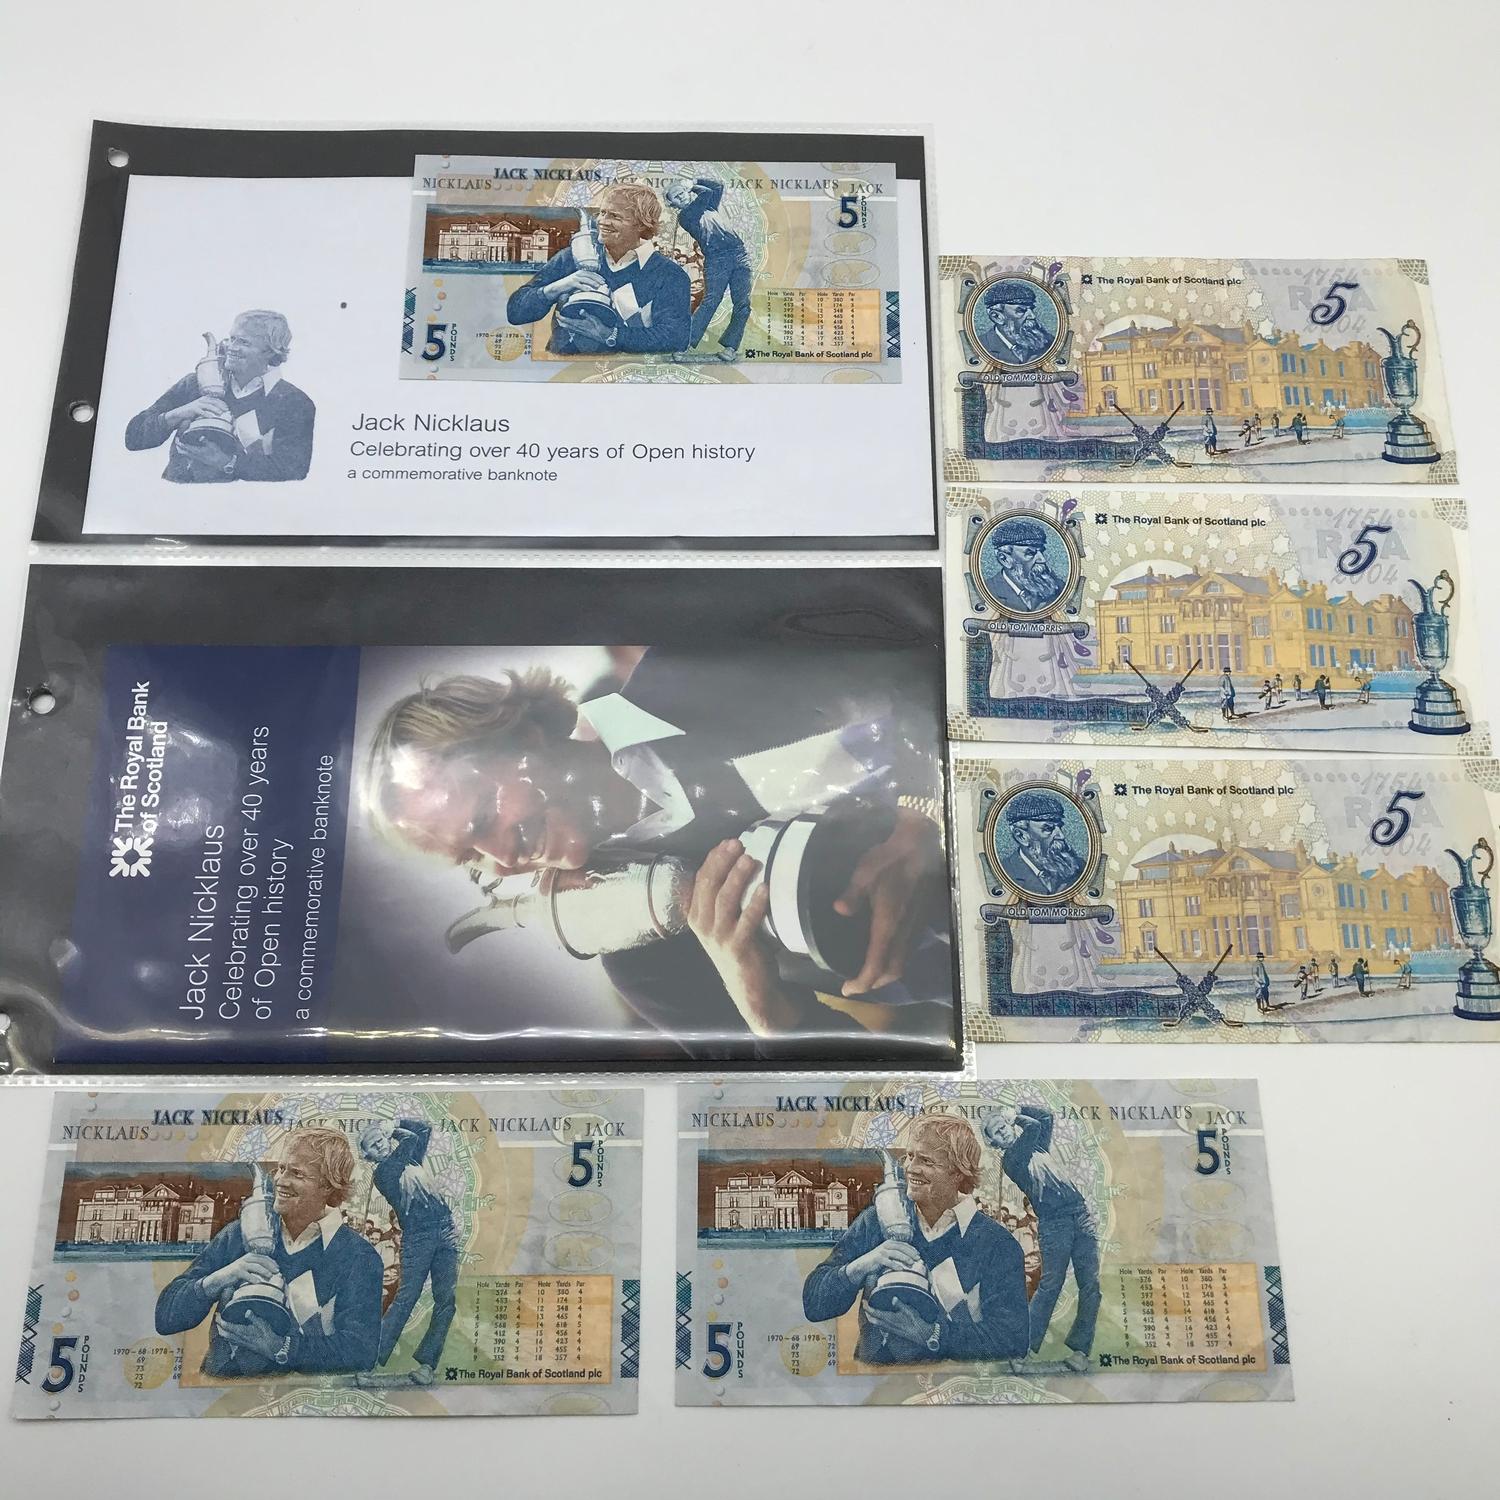 A Lot of three Jack Nicklaus £5 bank notes together with three Old Tom Morris £5 bank notes.